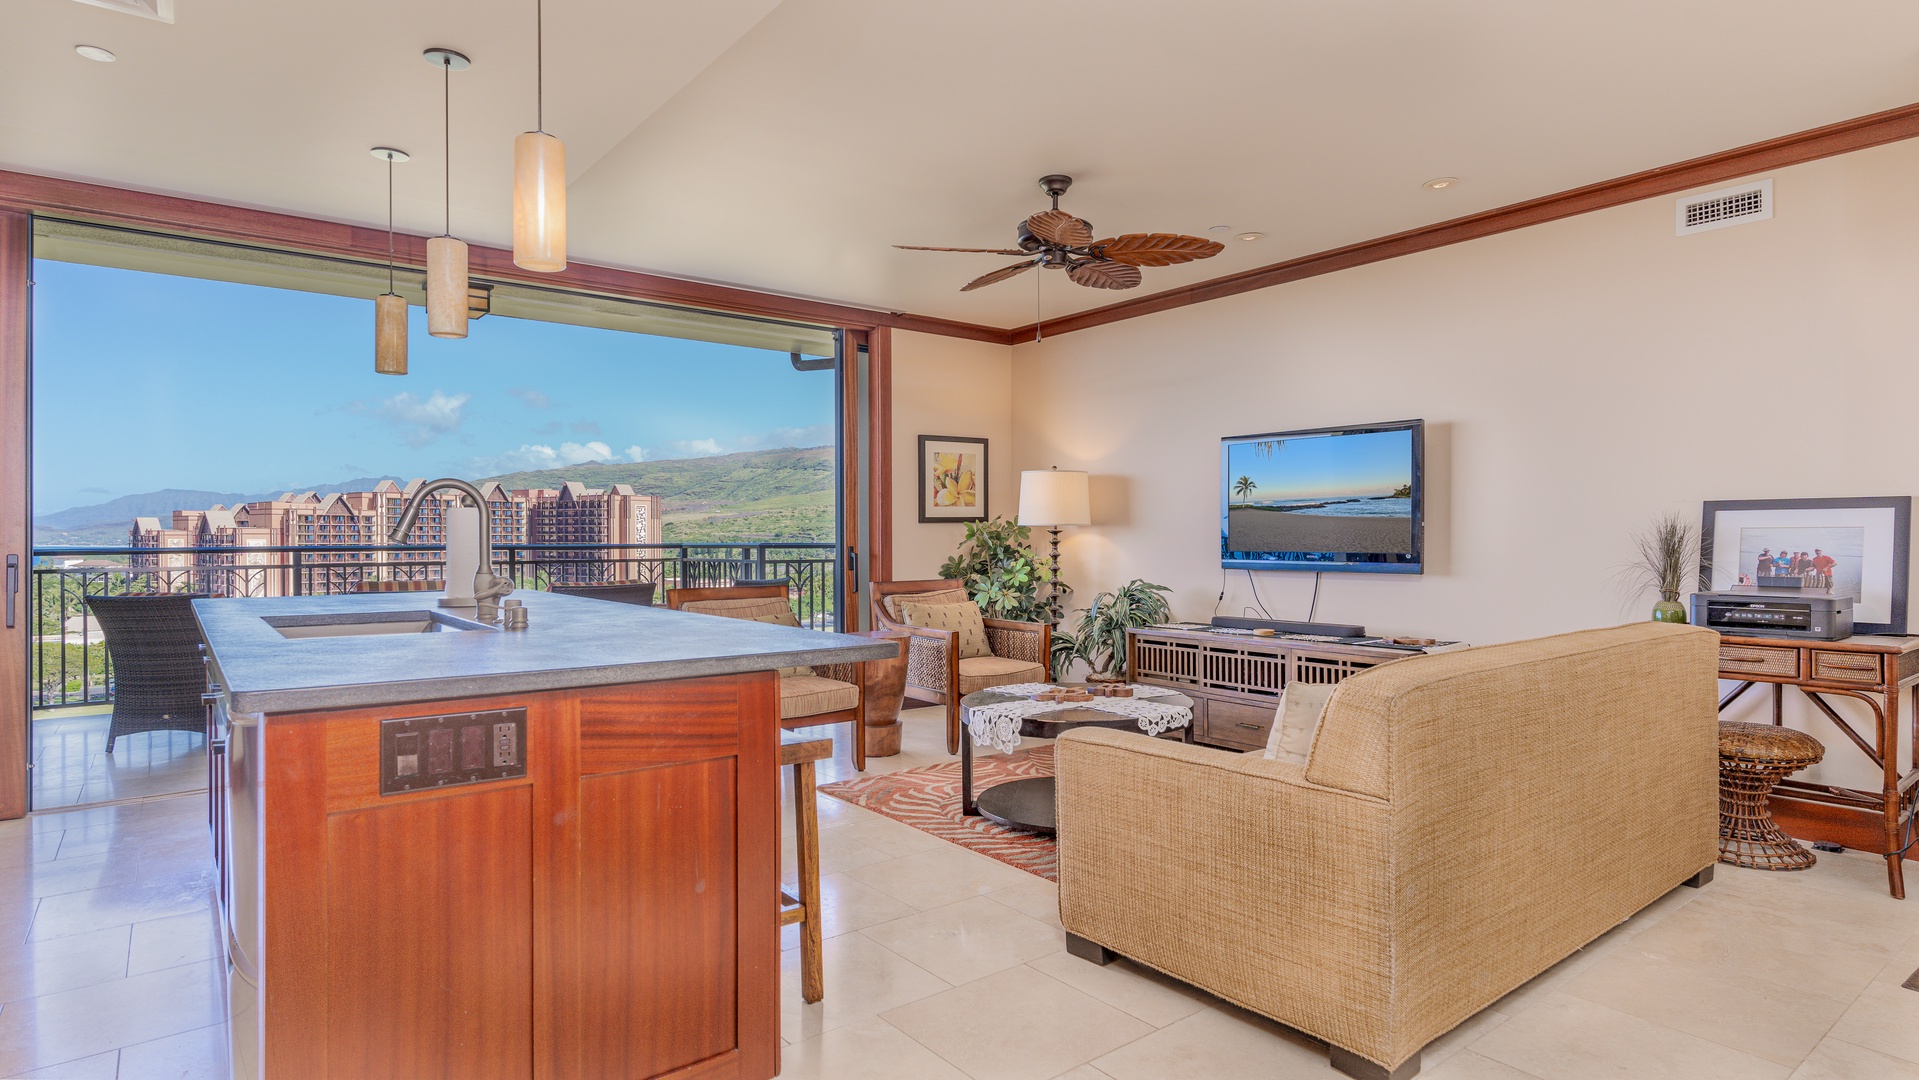 Kapolei Vacation Rentals, Ko Olina Beach Villas B1101 - Turn on your favorite shows and relax with the best seat on the island.